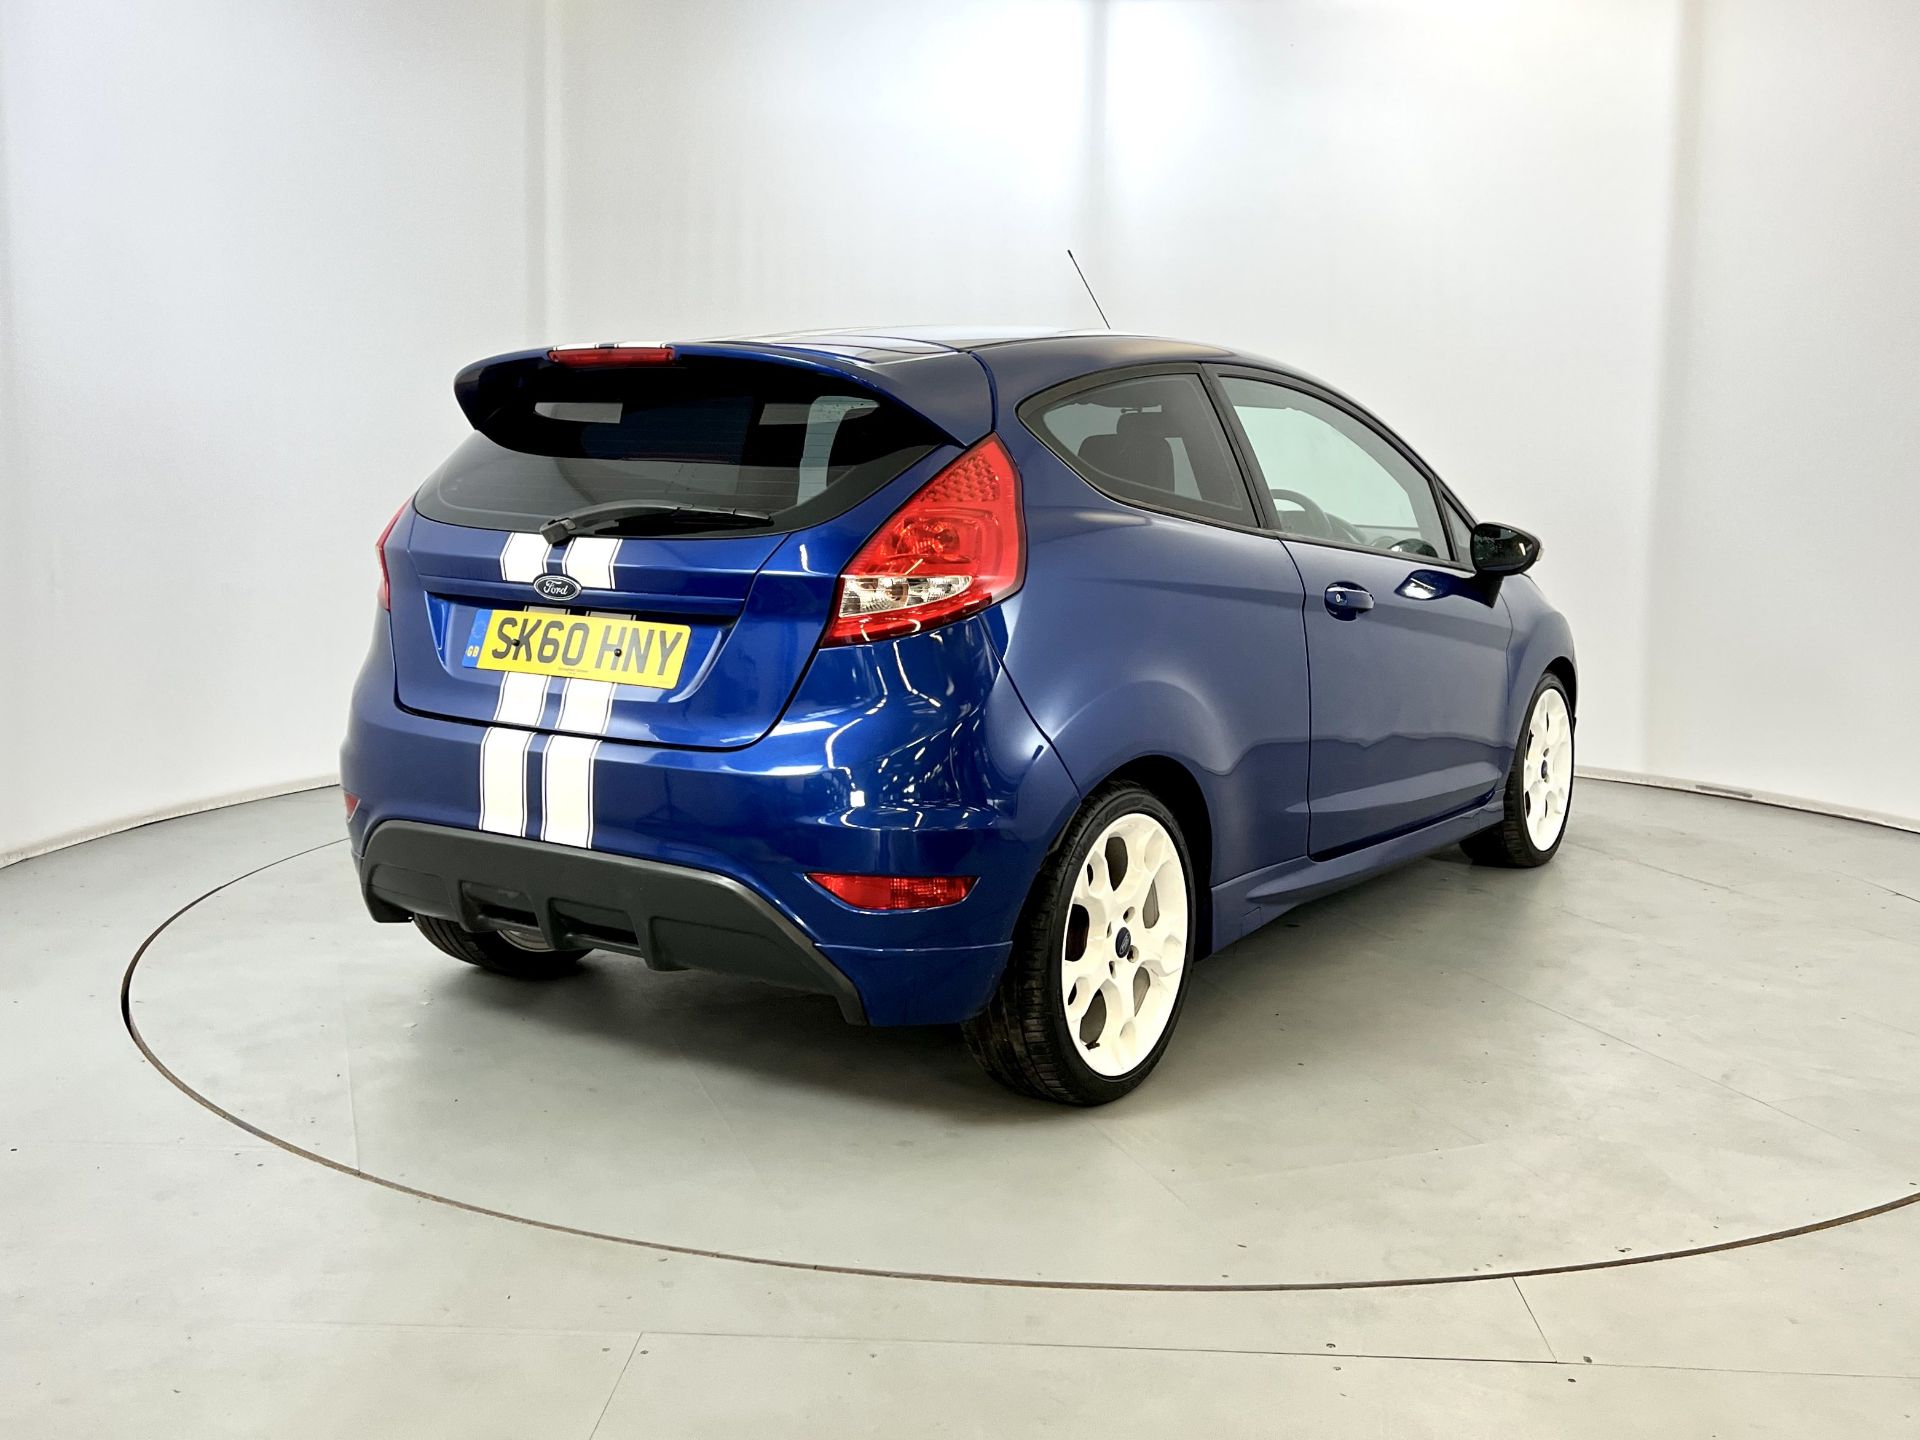 Ford Fiesta S1600 - Image 9 of 30